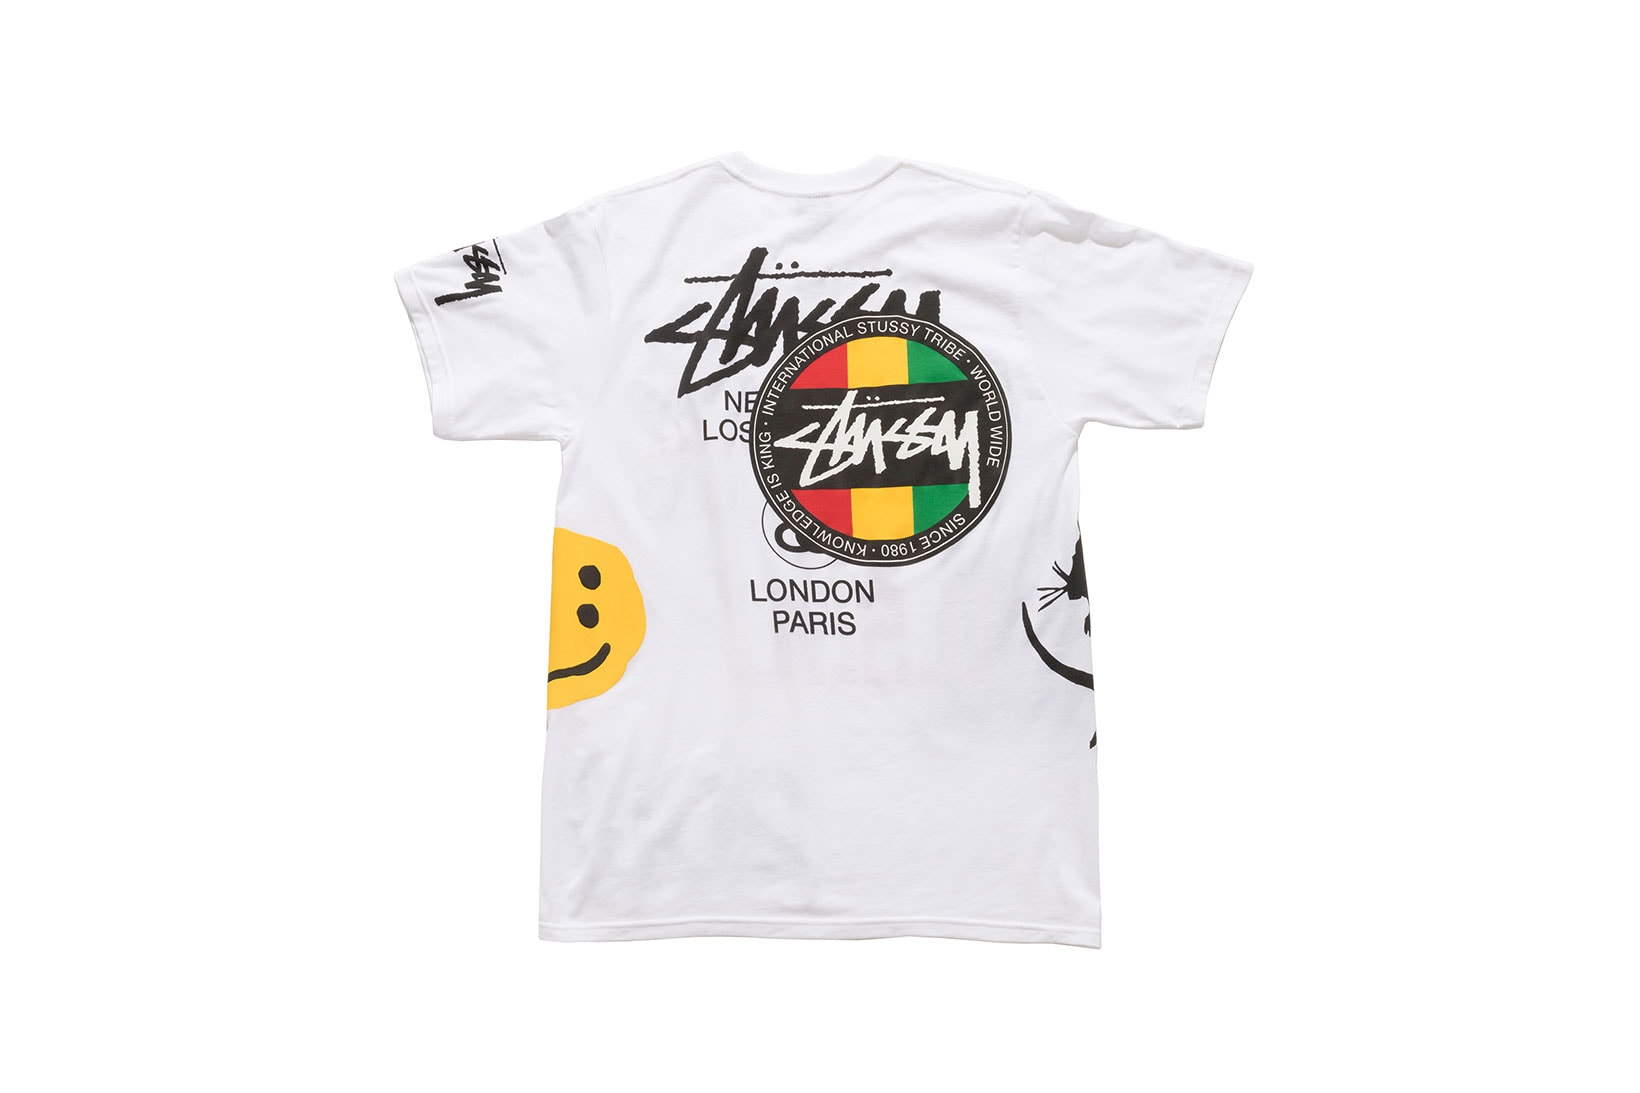 stussy cactus plant flea market dover street market los angeles collaboration fourth of july summer fashion clothing line 